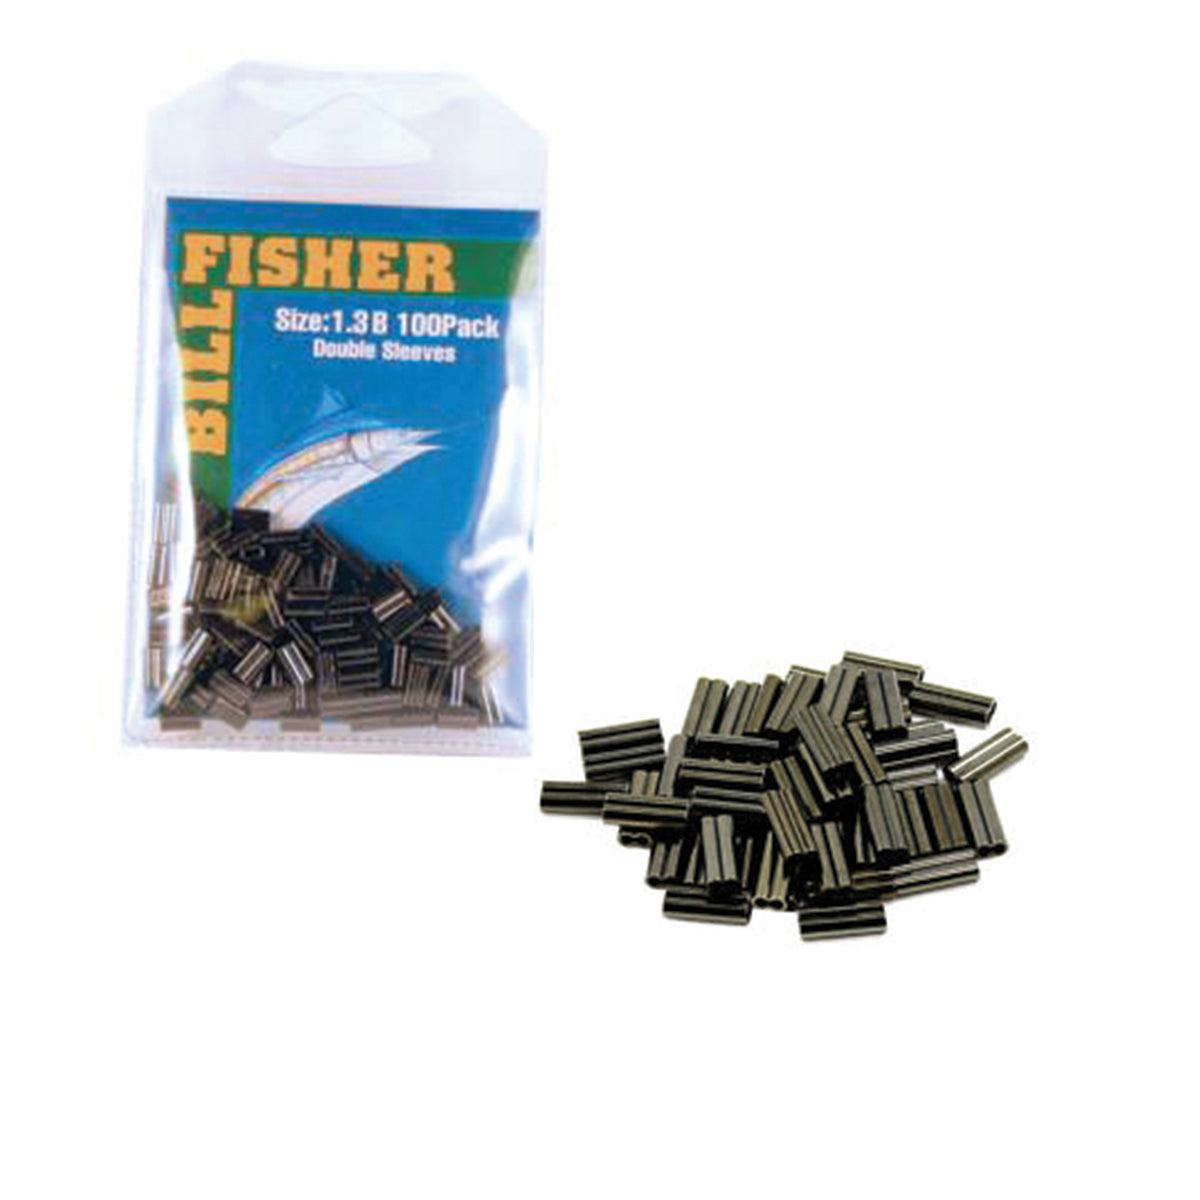 Billfisher Double Sleeves 100-Pack